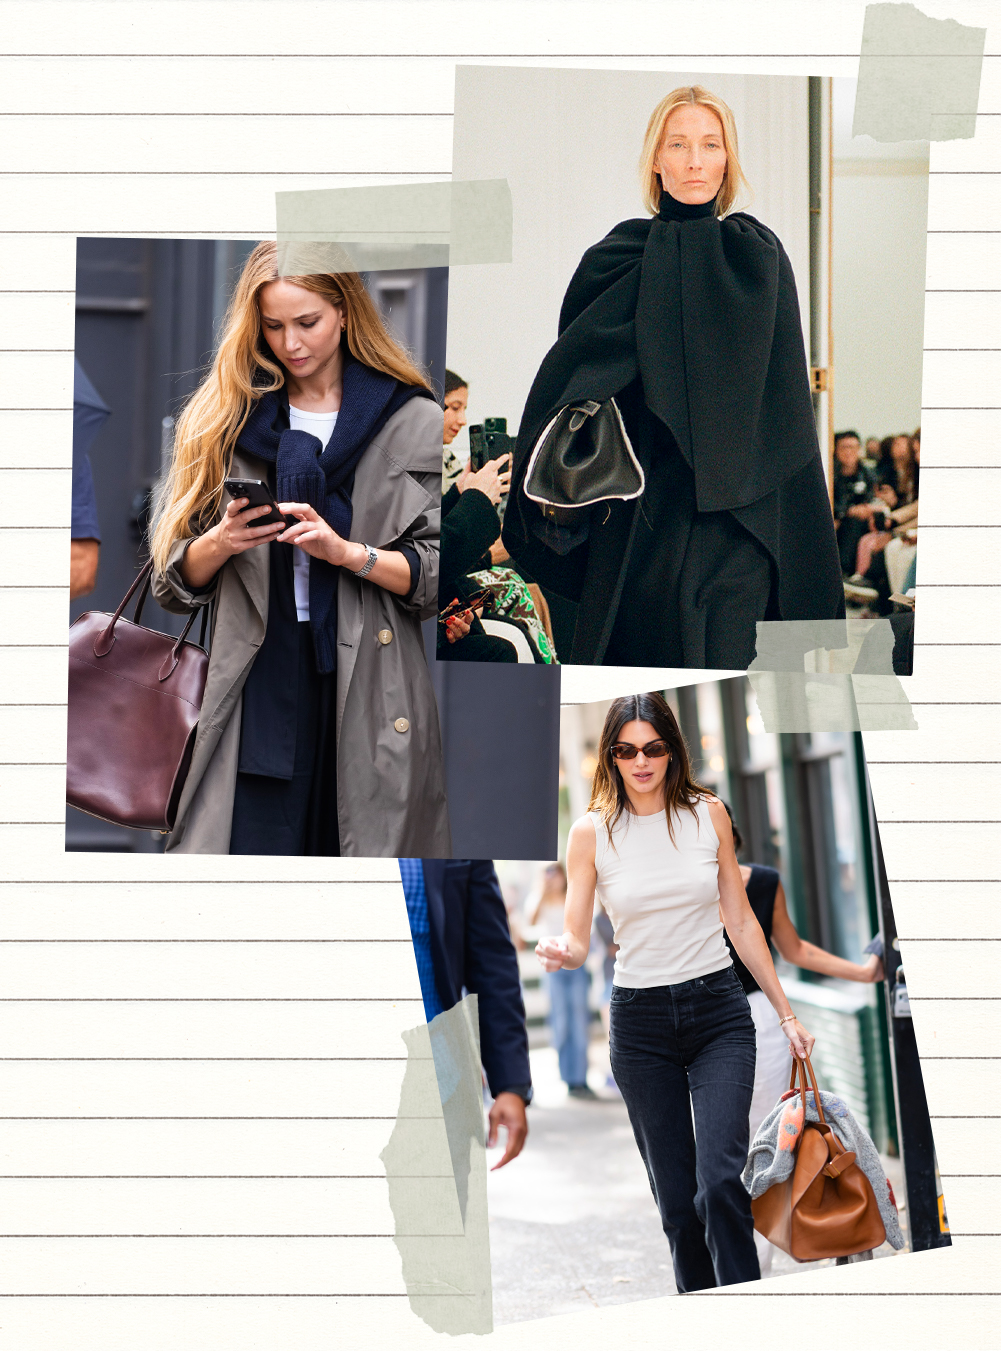 The celeb-approved handbag trends to get your hands on this fall